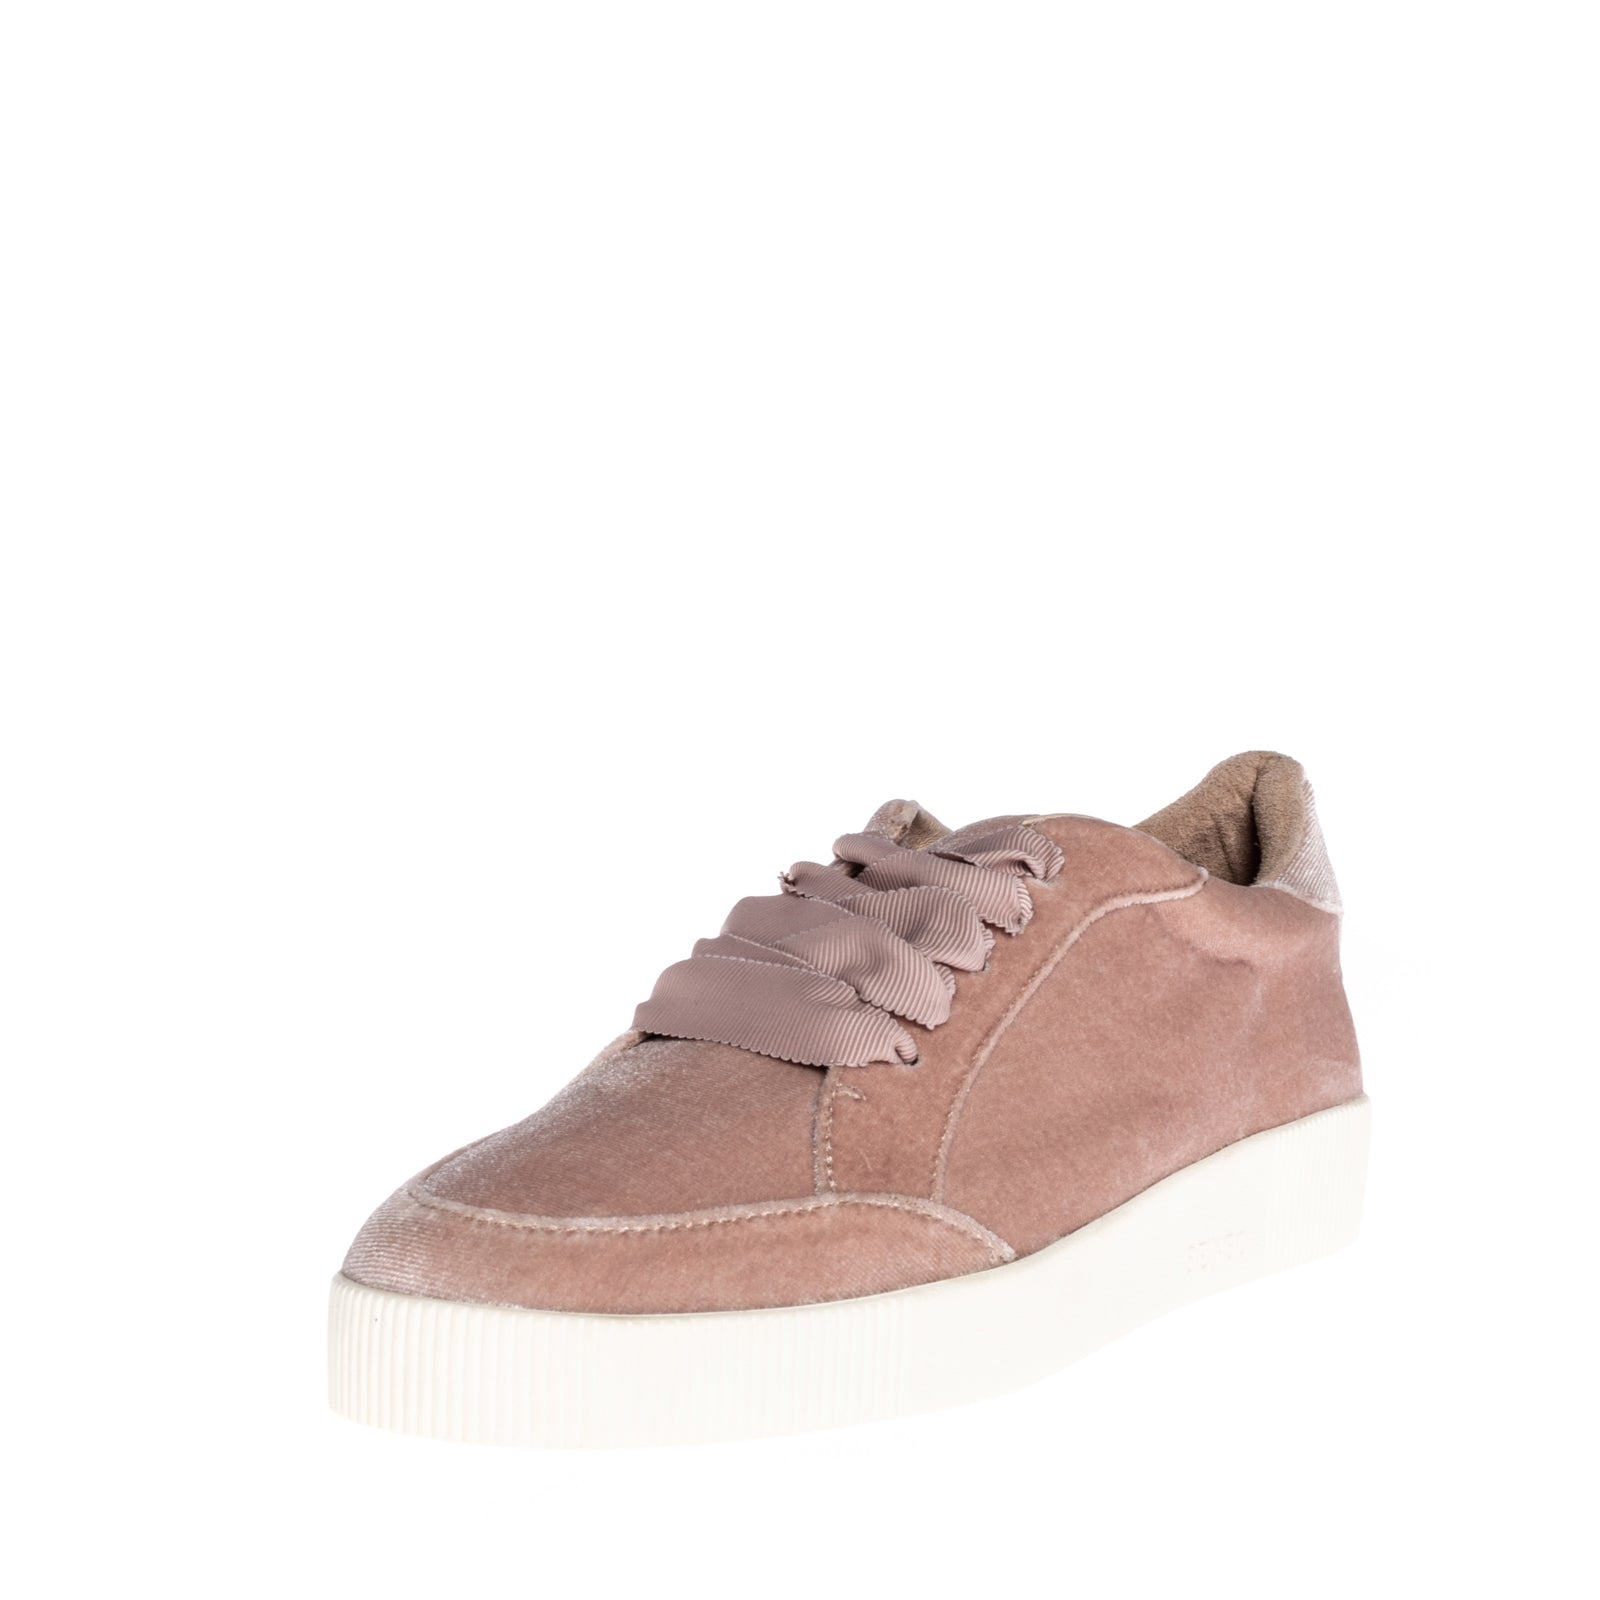 SENSO Velour Sneakers Size 37 UK 4 US 7 Grosgrain Laces Embossed Logo Round Toe gallery main photo